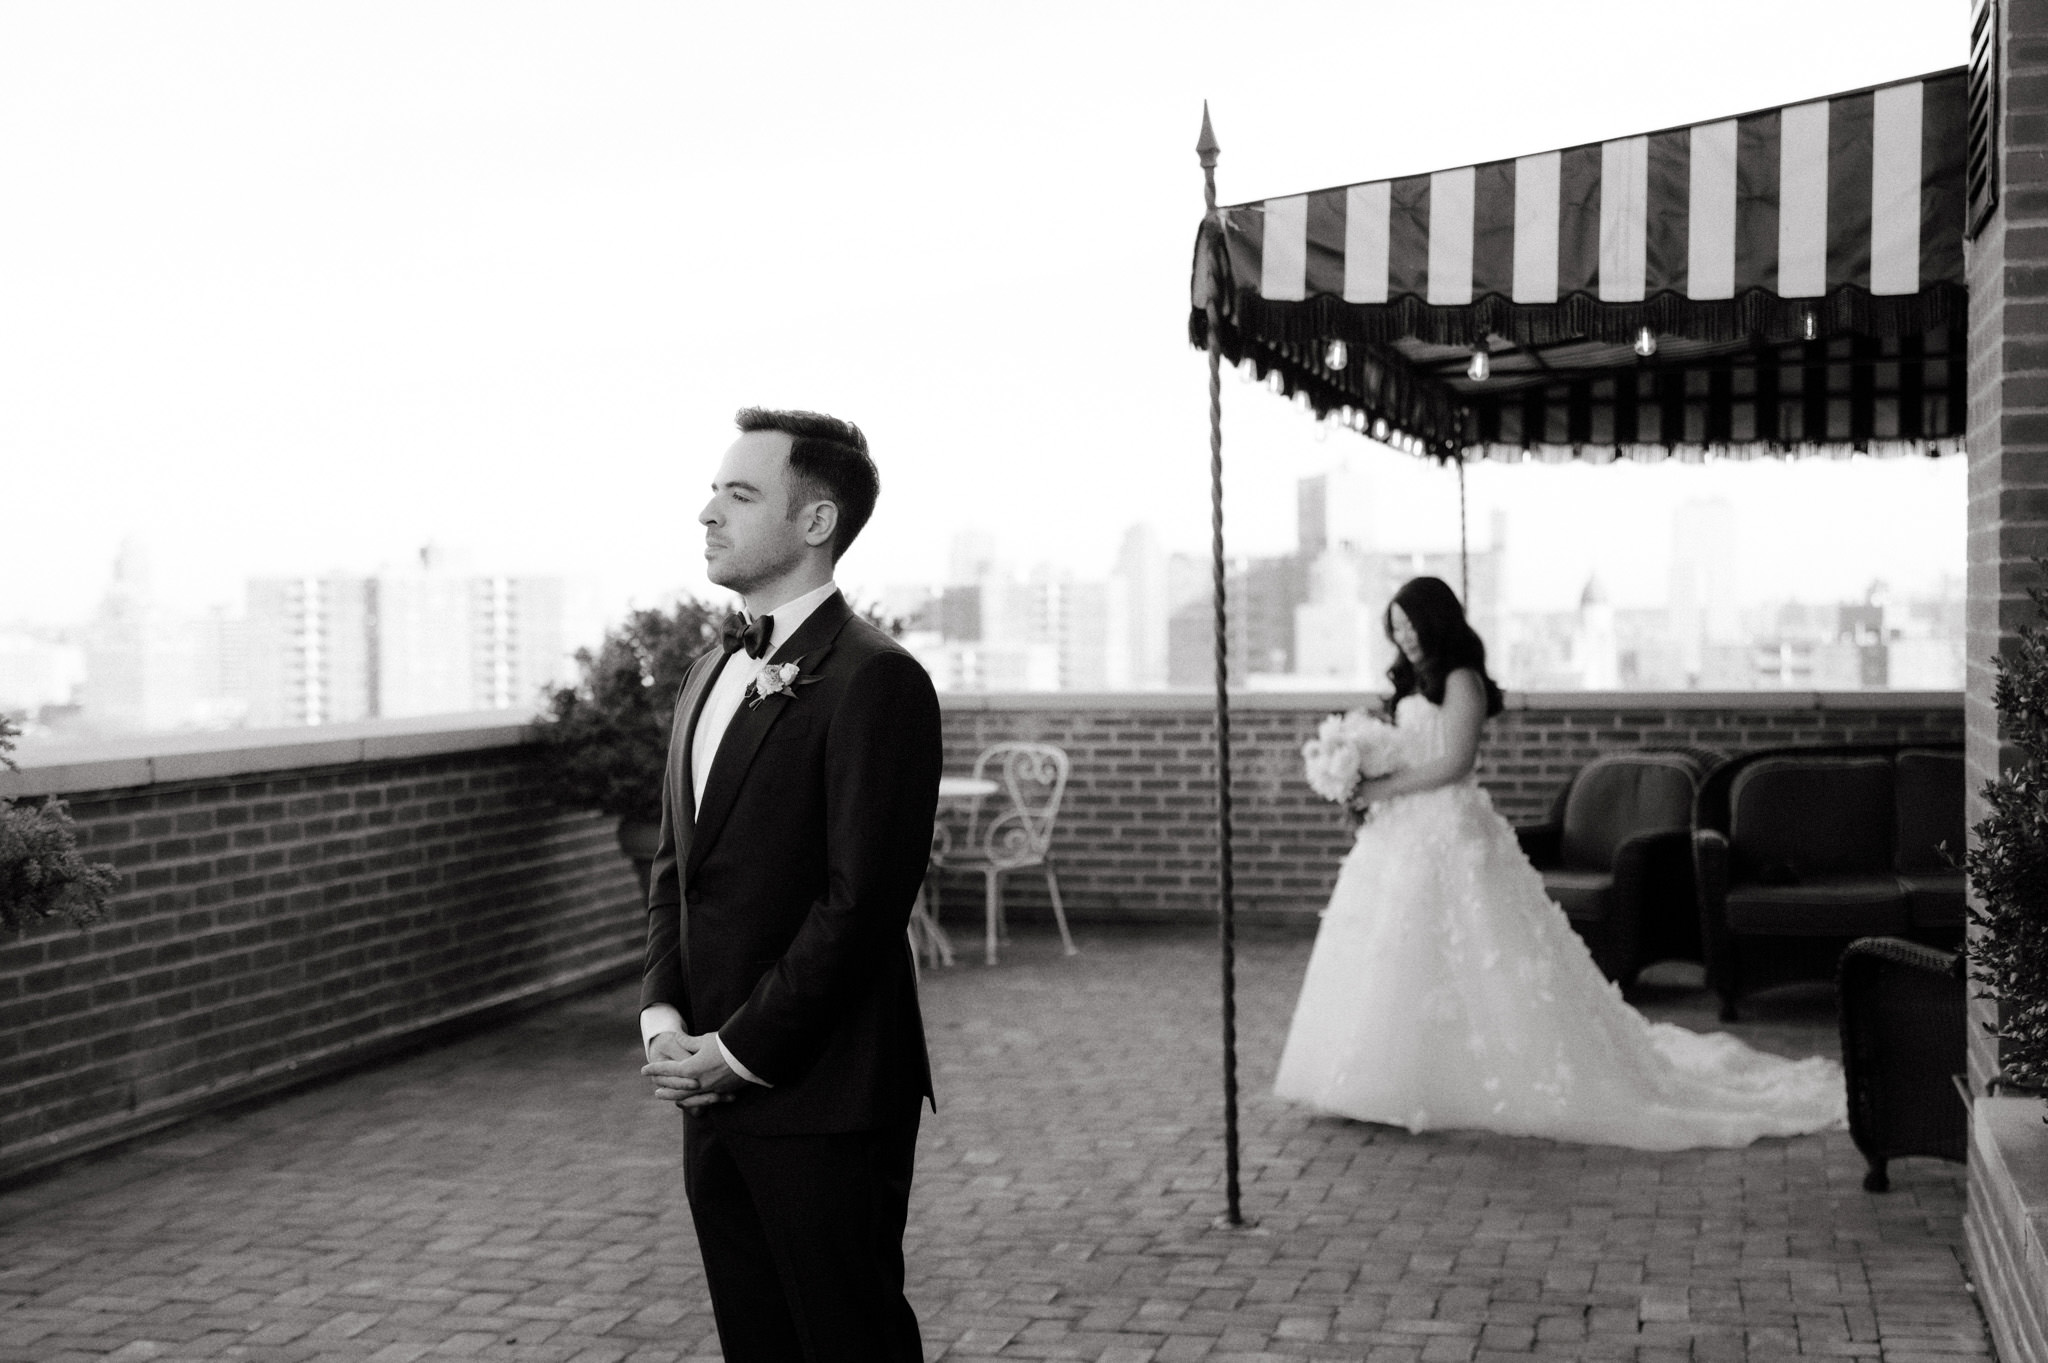 Black and white first look photo. Wedding photography package image by Jenny Fu Studio